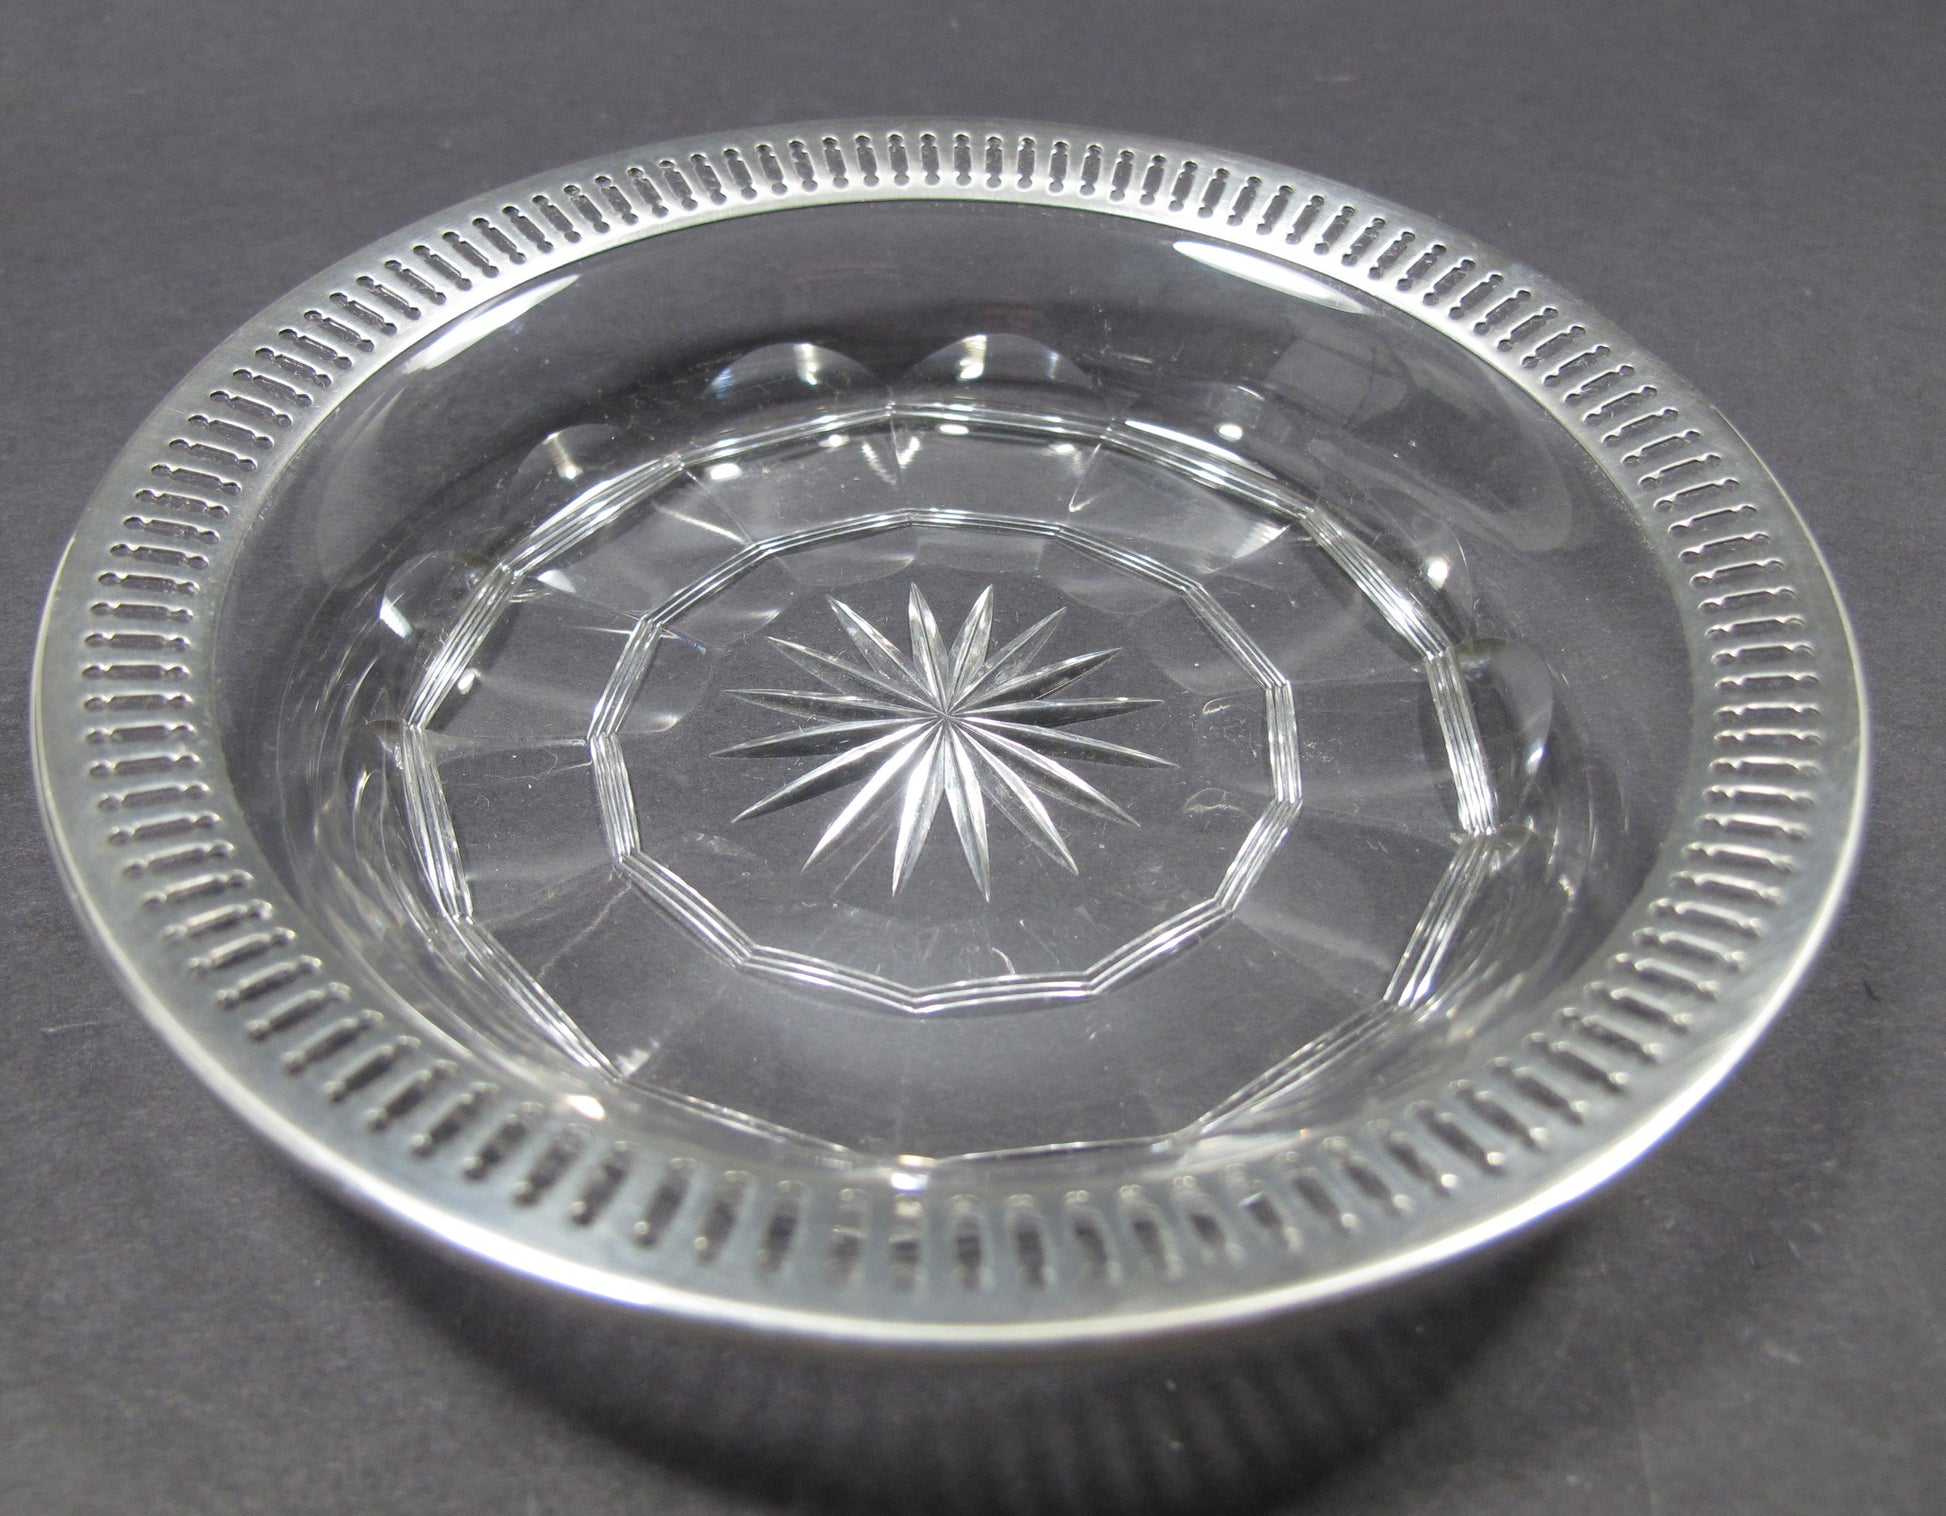 Sterling silver rim Cut Glass dish Antique - O'Rourke crystal awards & gifts abp cut glass